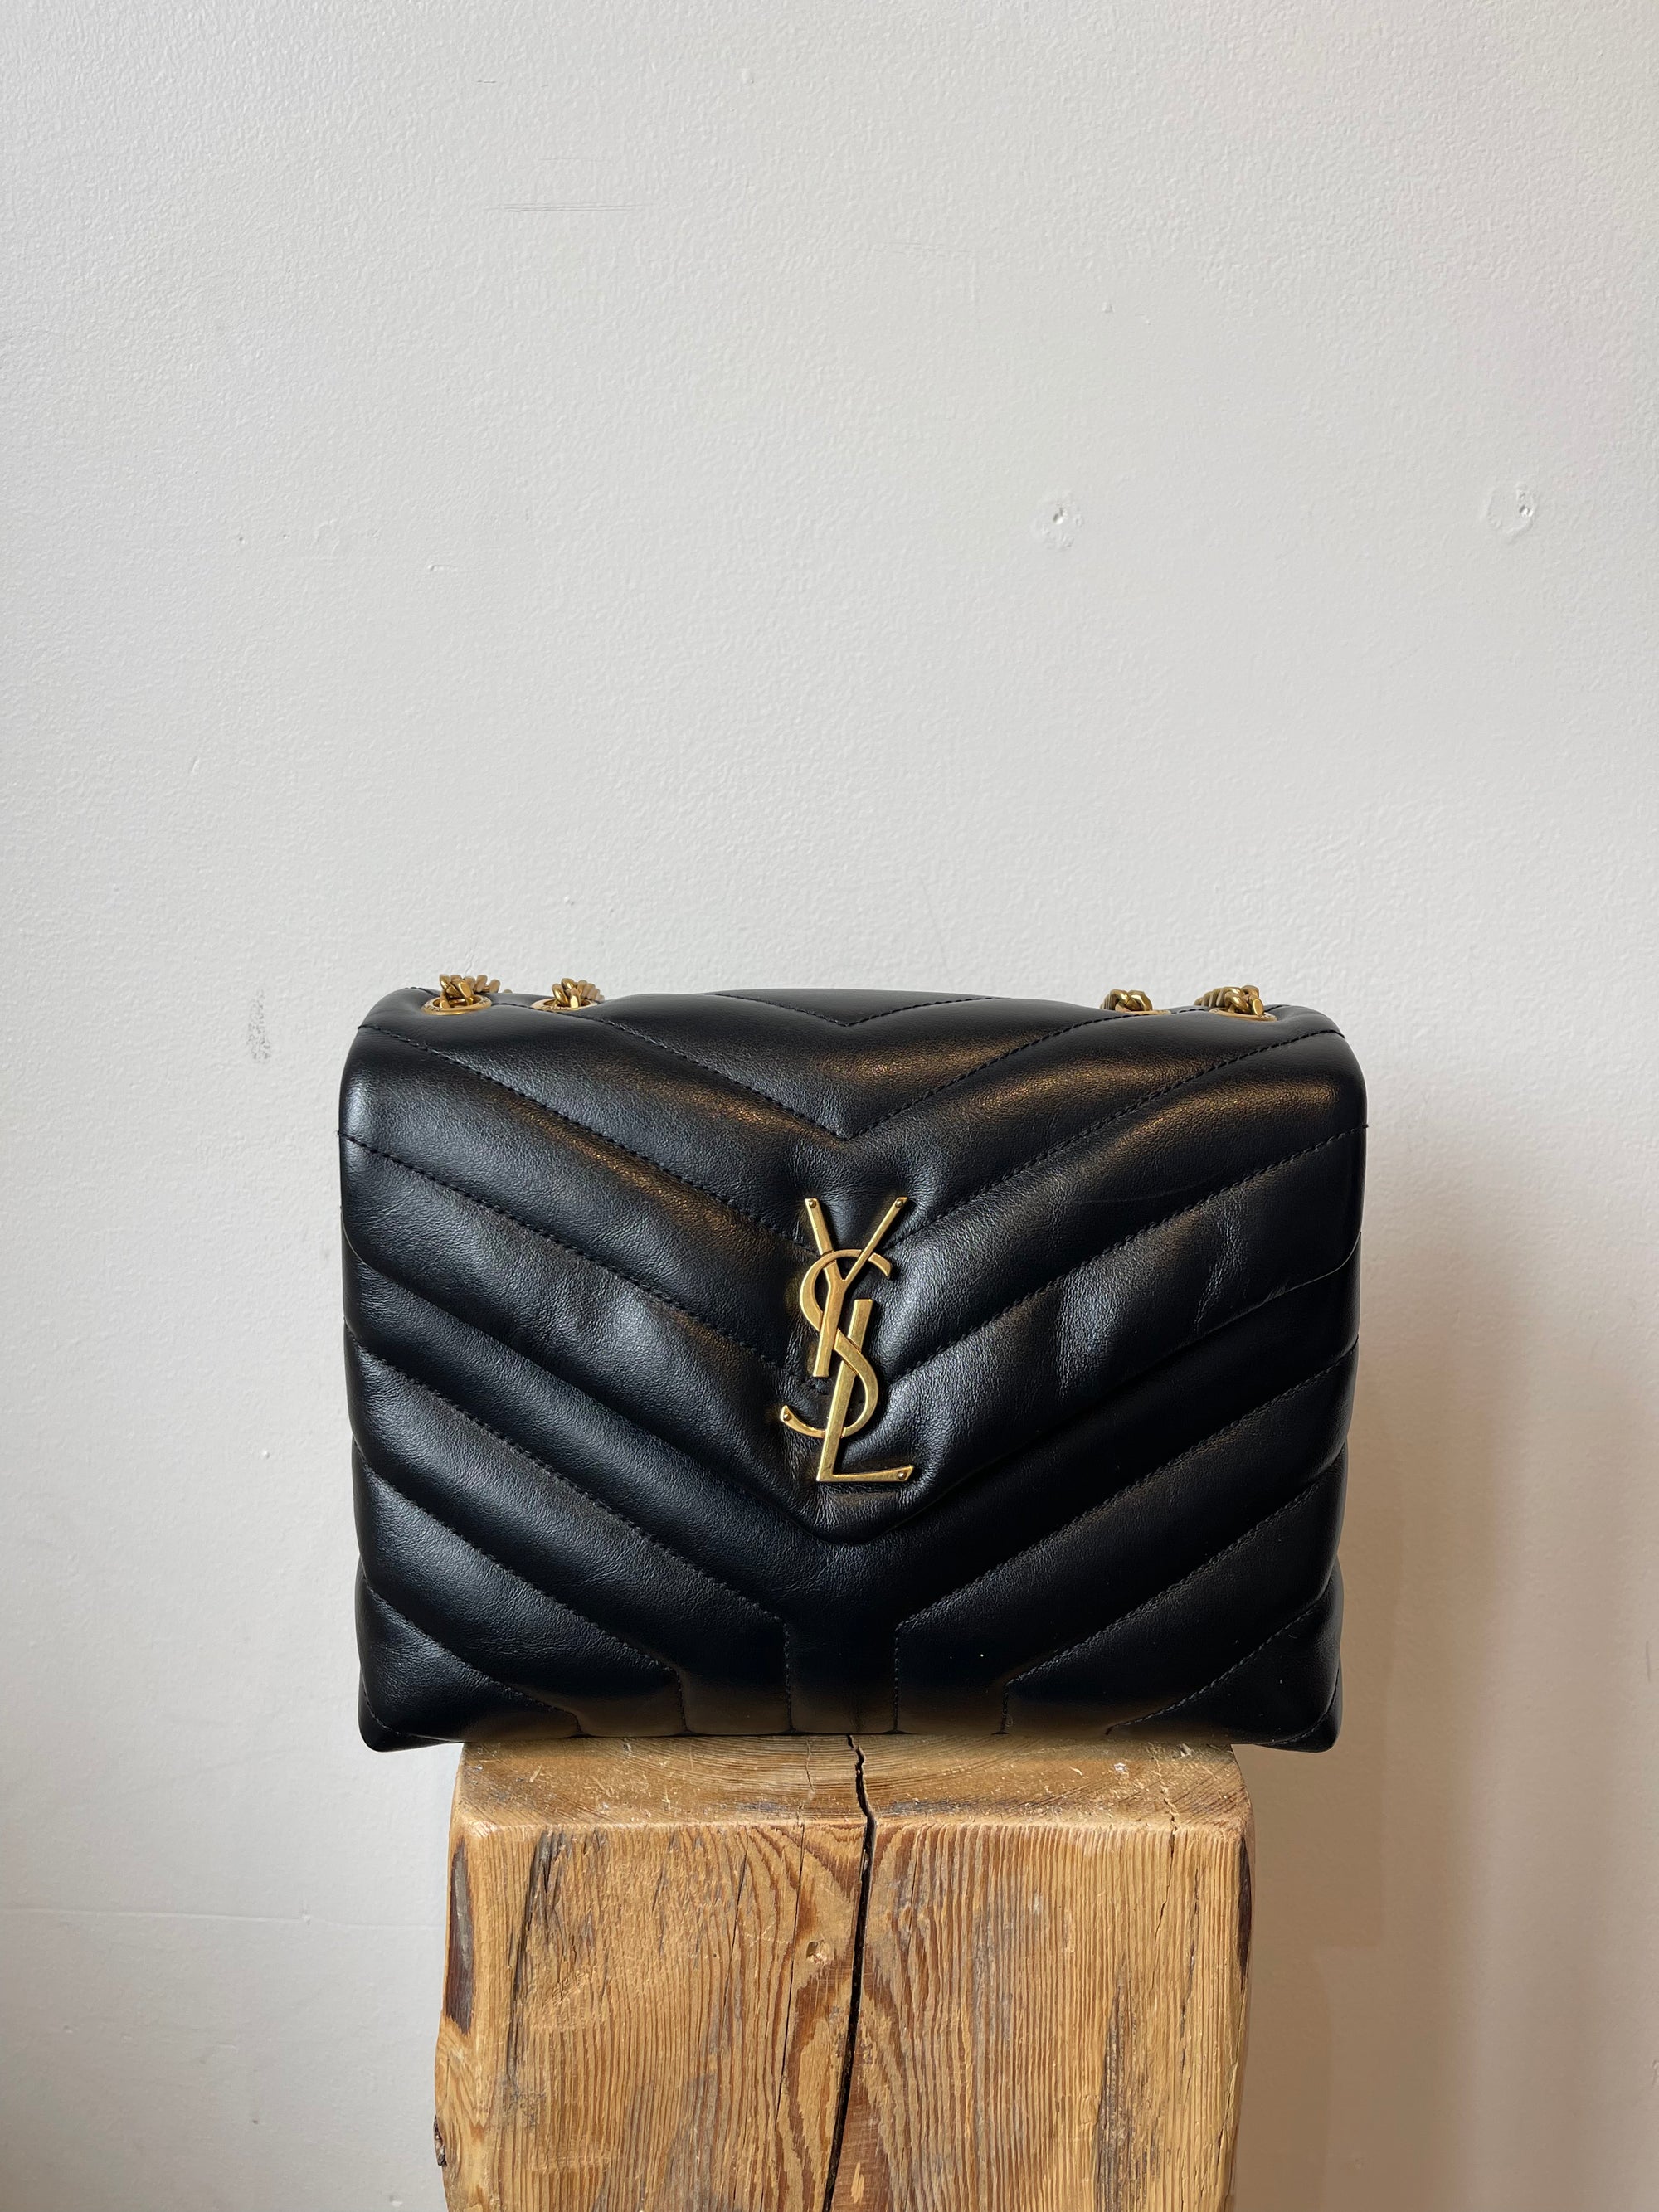 Yves Saint Laurent, Small Lou Lou Handbag in Black Quilted Leather